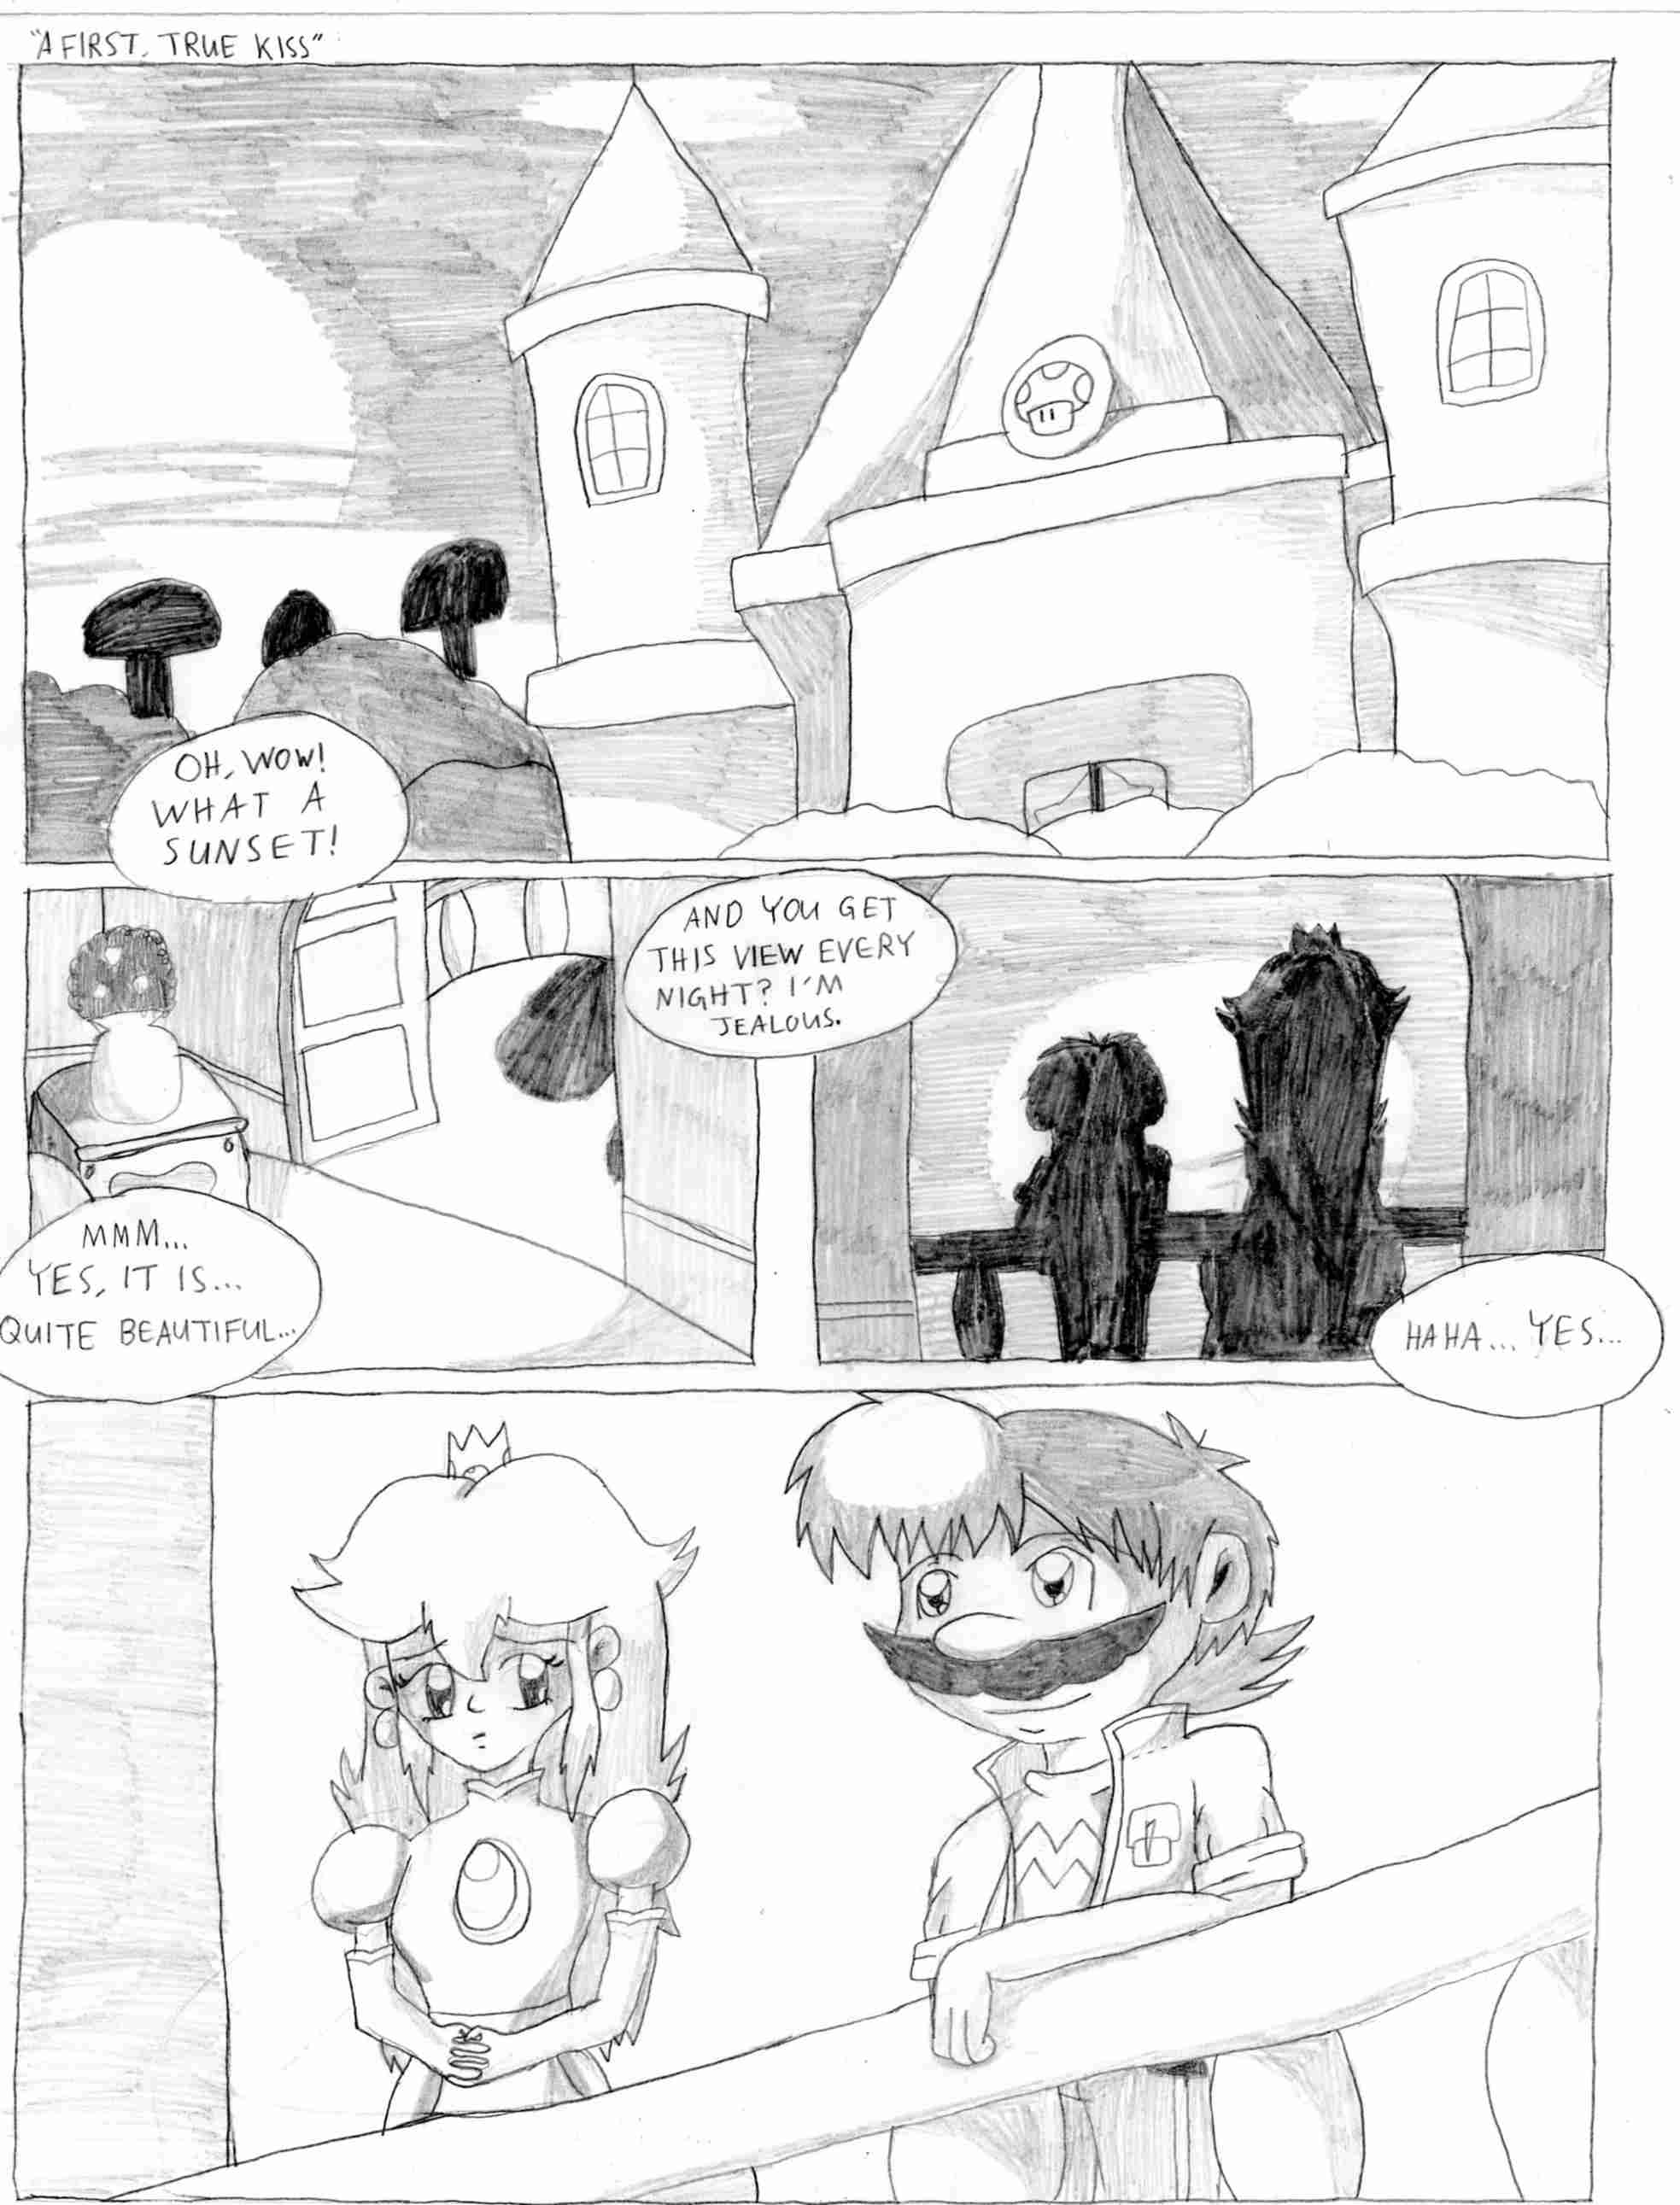 A First, True Kiss Page 1 by Nintendo_Nut